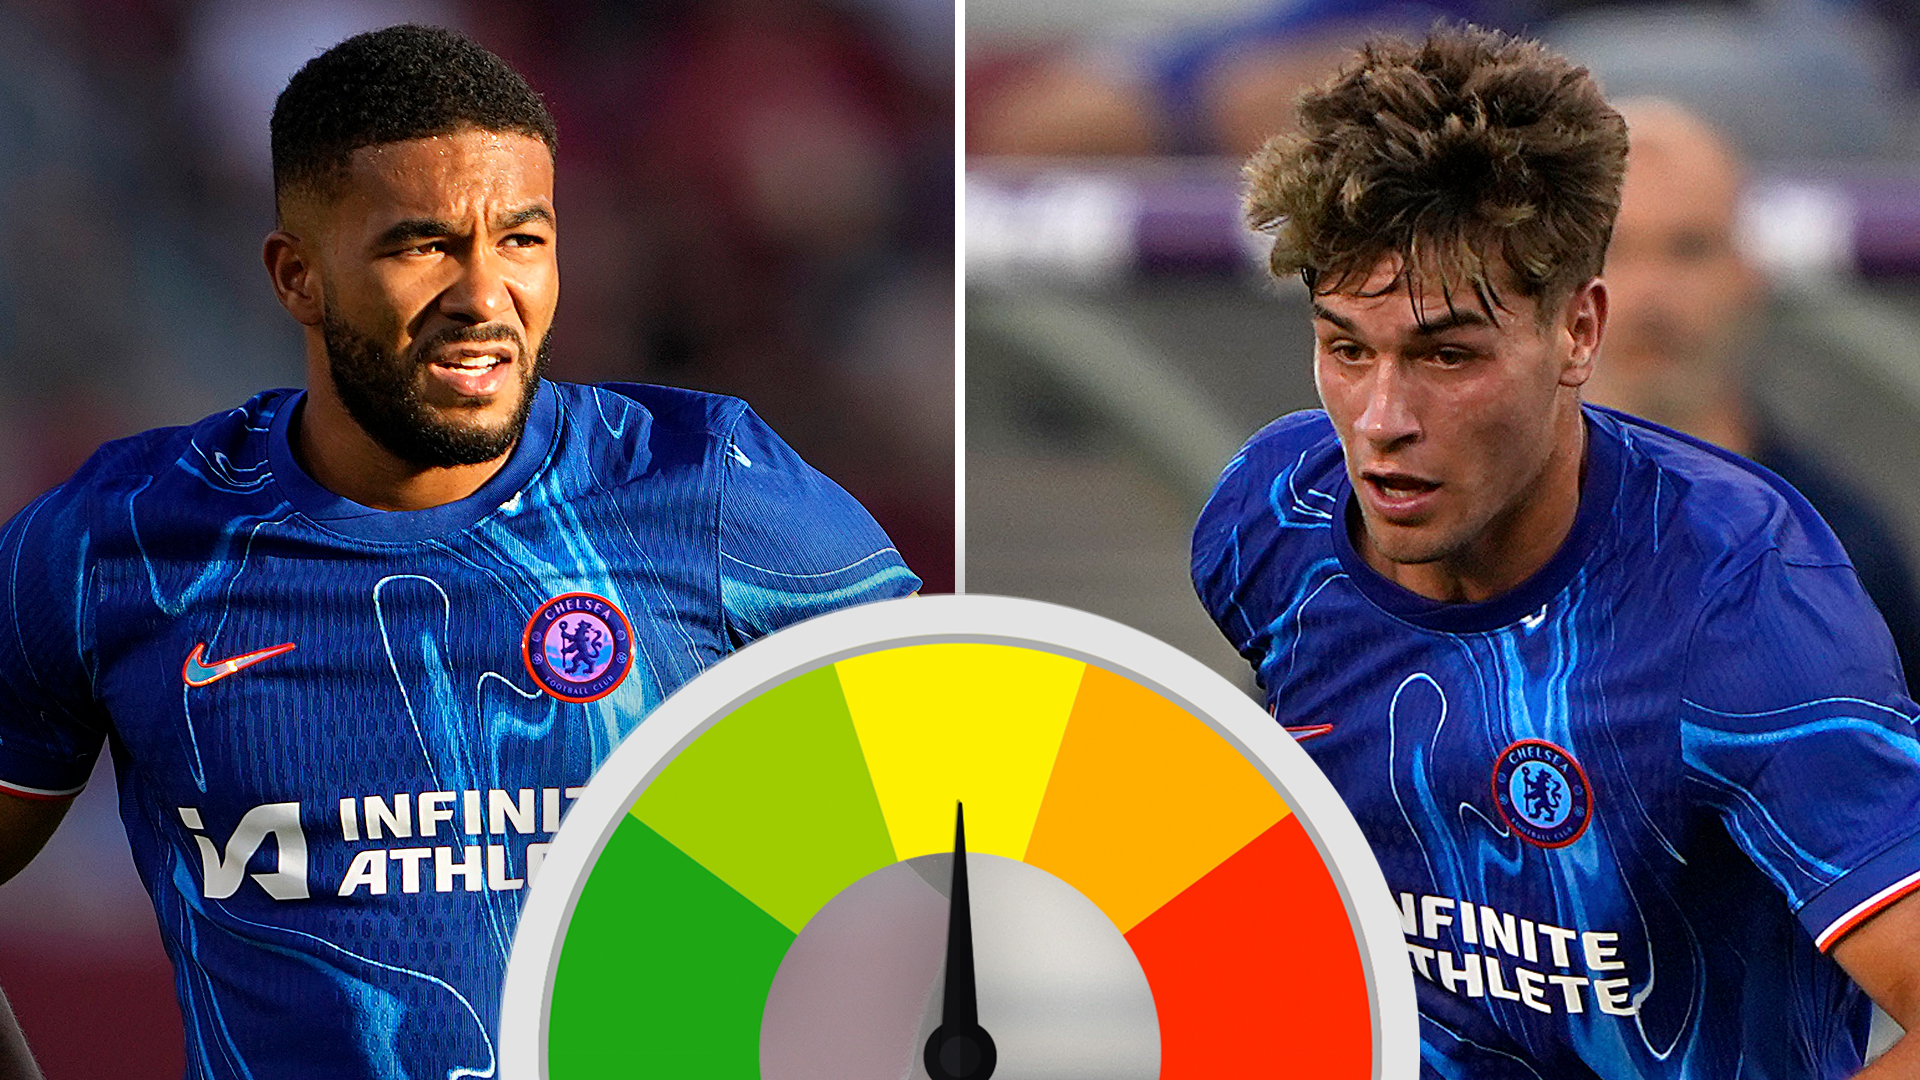 Chelsea player ratings: Reece James impresses in new role against Wrexham but Marc Guiu needs time to gain composure [Video]